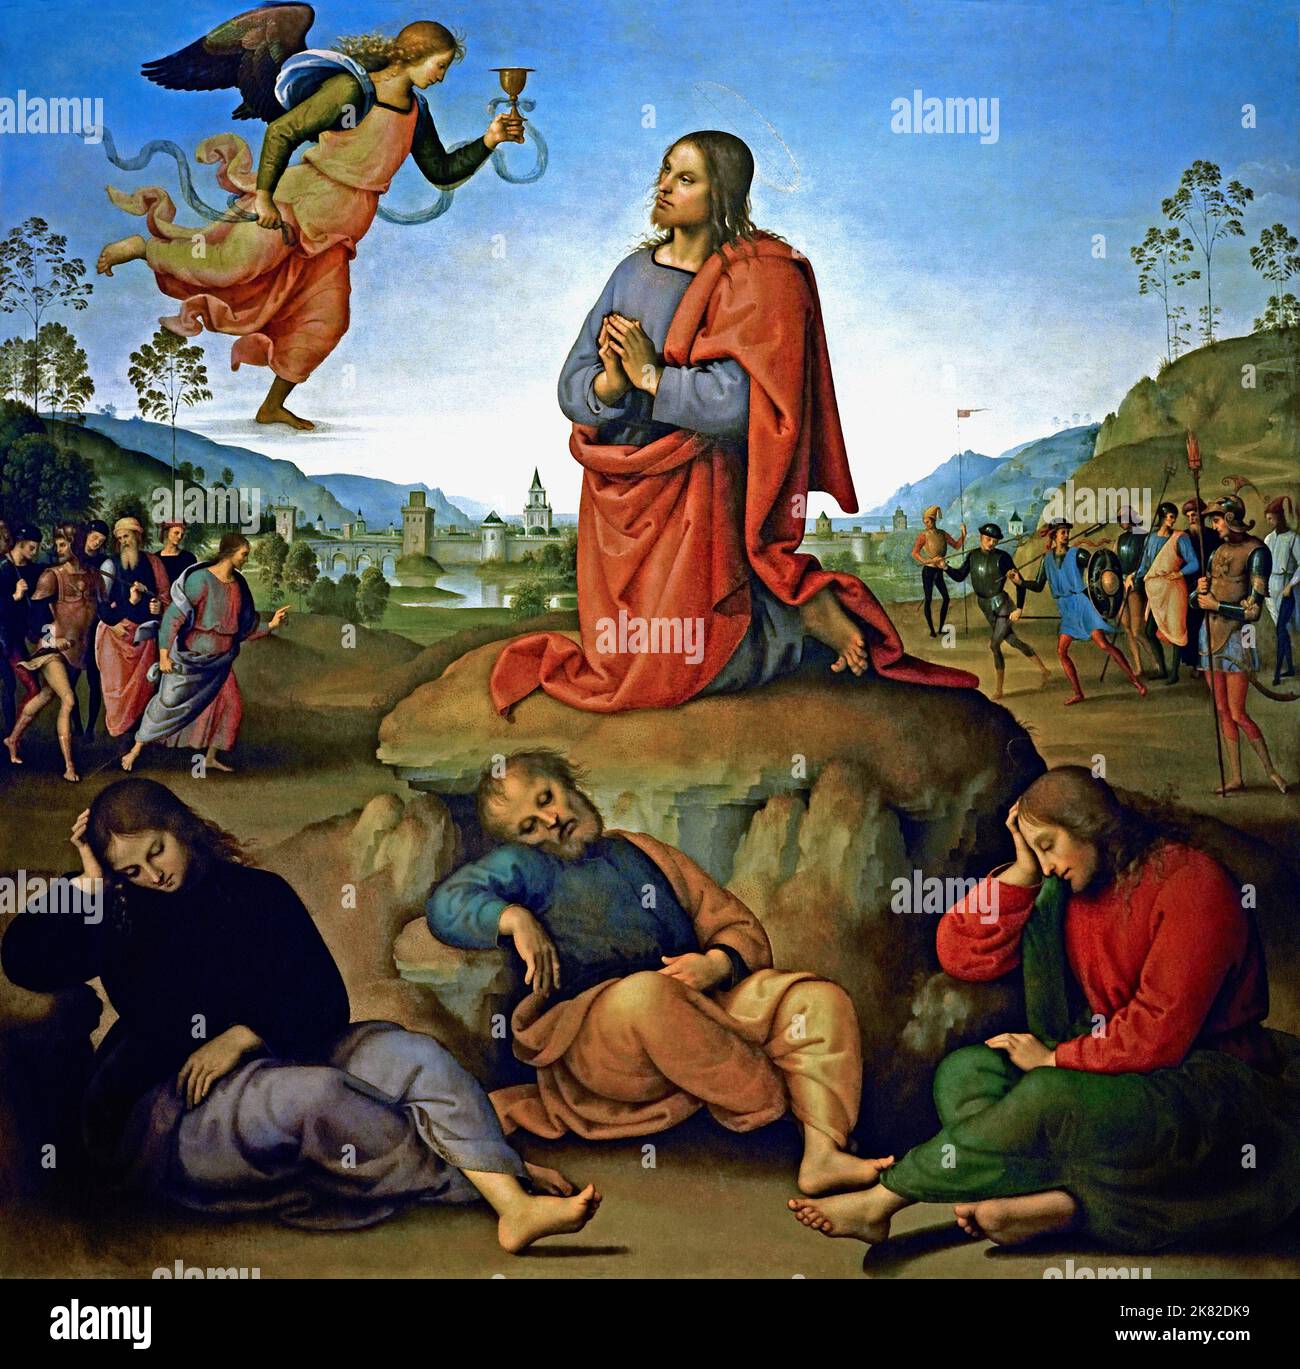 he Agony in the Garden 1492 Pietro Perugino 1446/1452 – 1523 born Pietro Vannucci, Italian Renaissance painter of the Umbrian school, Italy ( Christ is portrayed in center of the panel above a clear sky, kneeling in the Garden of Gethsemane and receiving by an angel a divine chalice. His figure forms a triangle with the three sleeping apostles at the bottom (from the left, John, Peter and James); the triangle is connected to the painting's sides by the symmetrical line of the hills. Behind Jesus is a lake landscape, a typical element of the Italian painting at the time, with a fortified city. Stock Photo